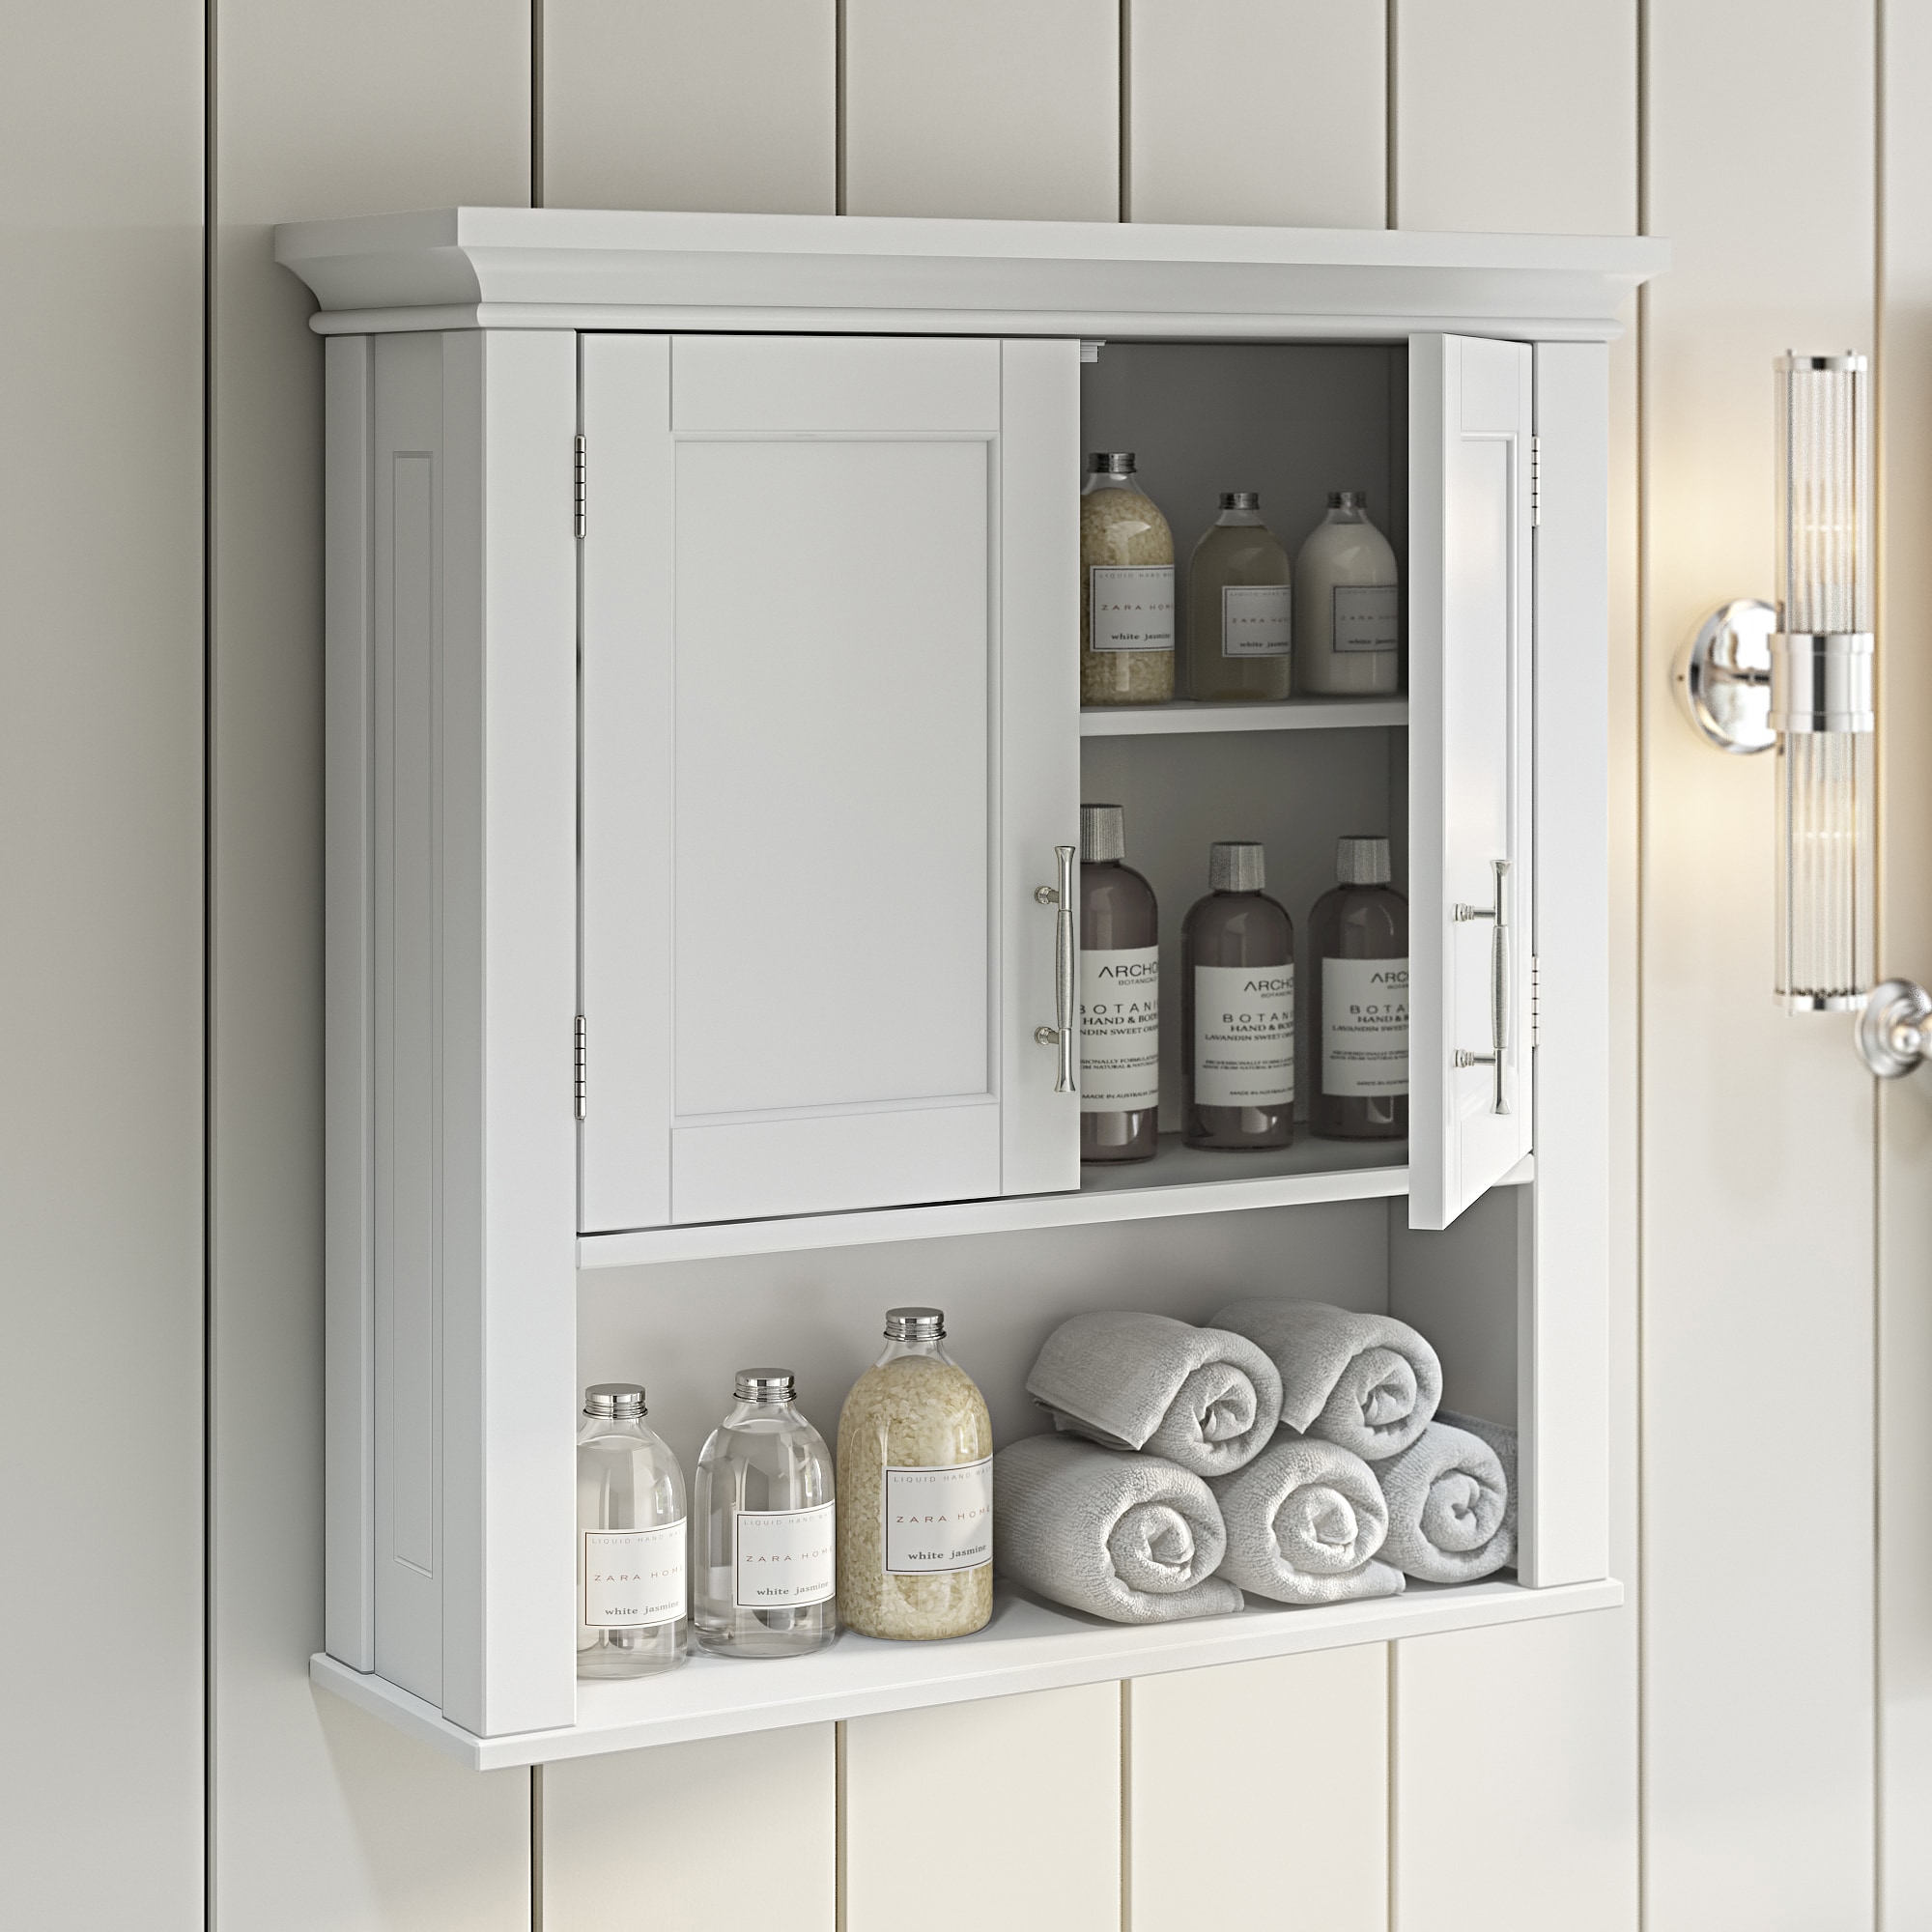 Large Capacity Wall-mounted Toilet Storage Shelf With Shower